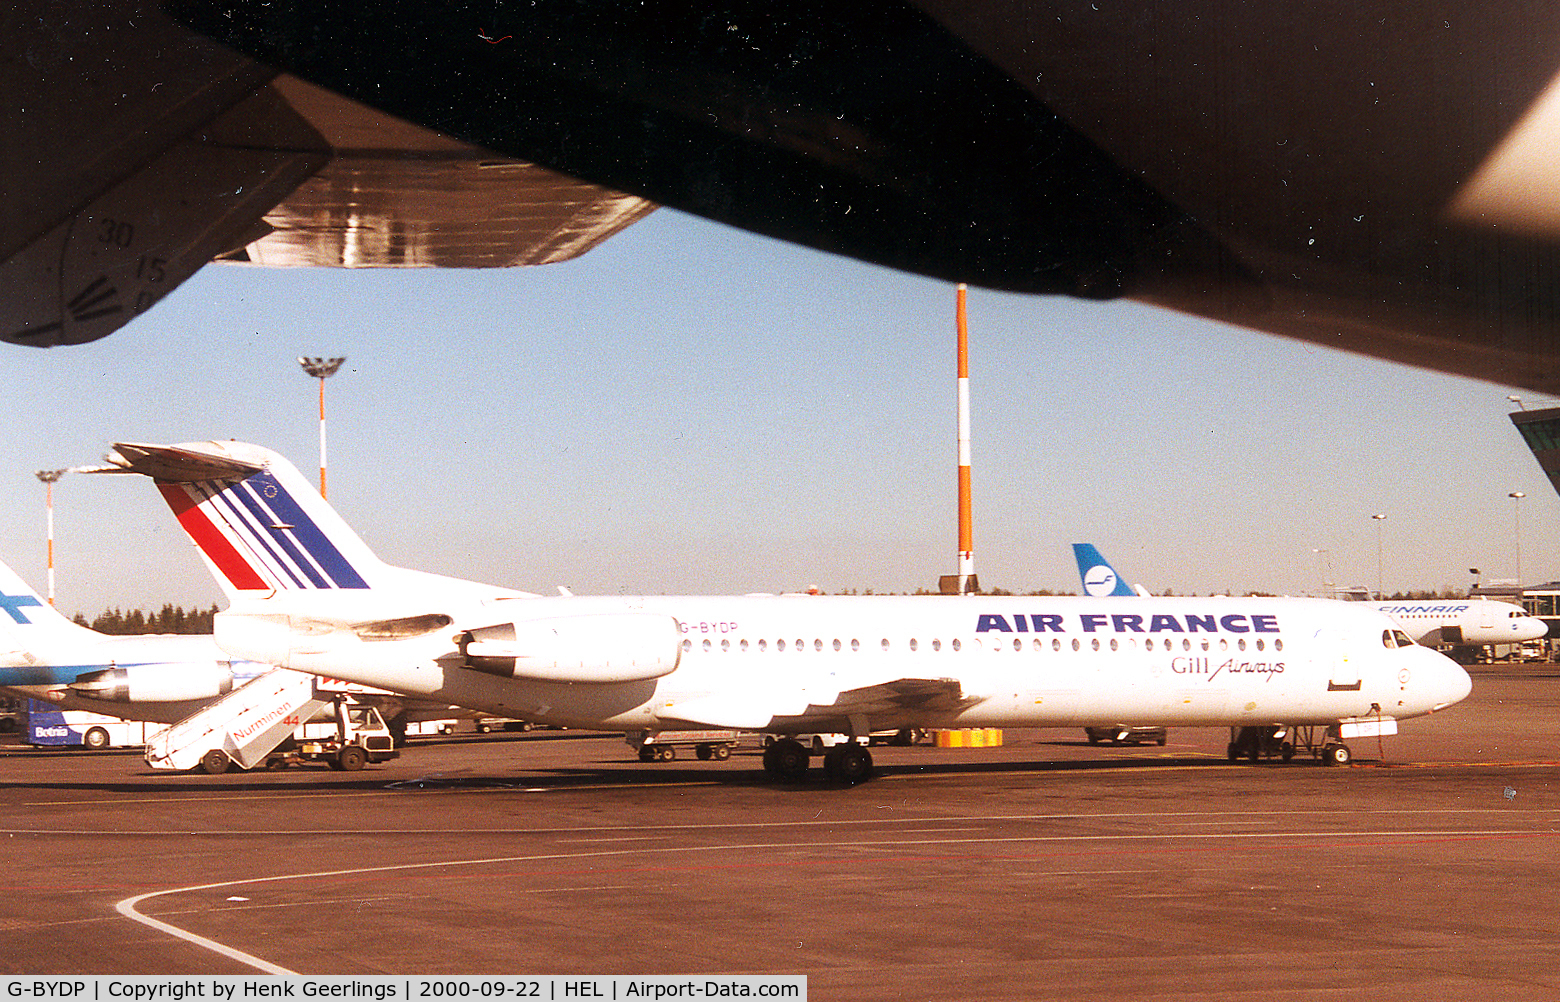 G-BYDP, 1990 Fokker 100 (F-28-0100) C/N 11321, Air France , operated by Gill Airways